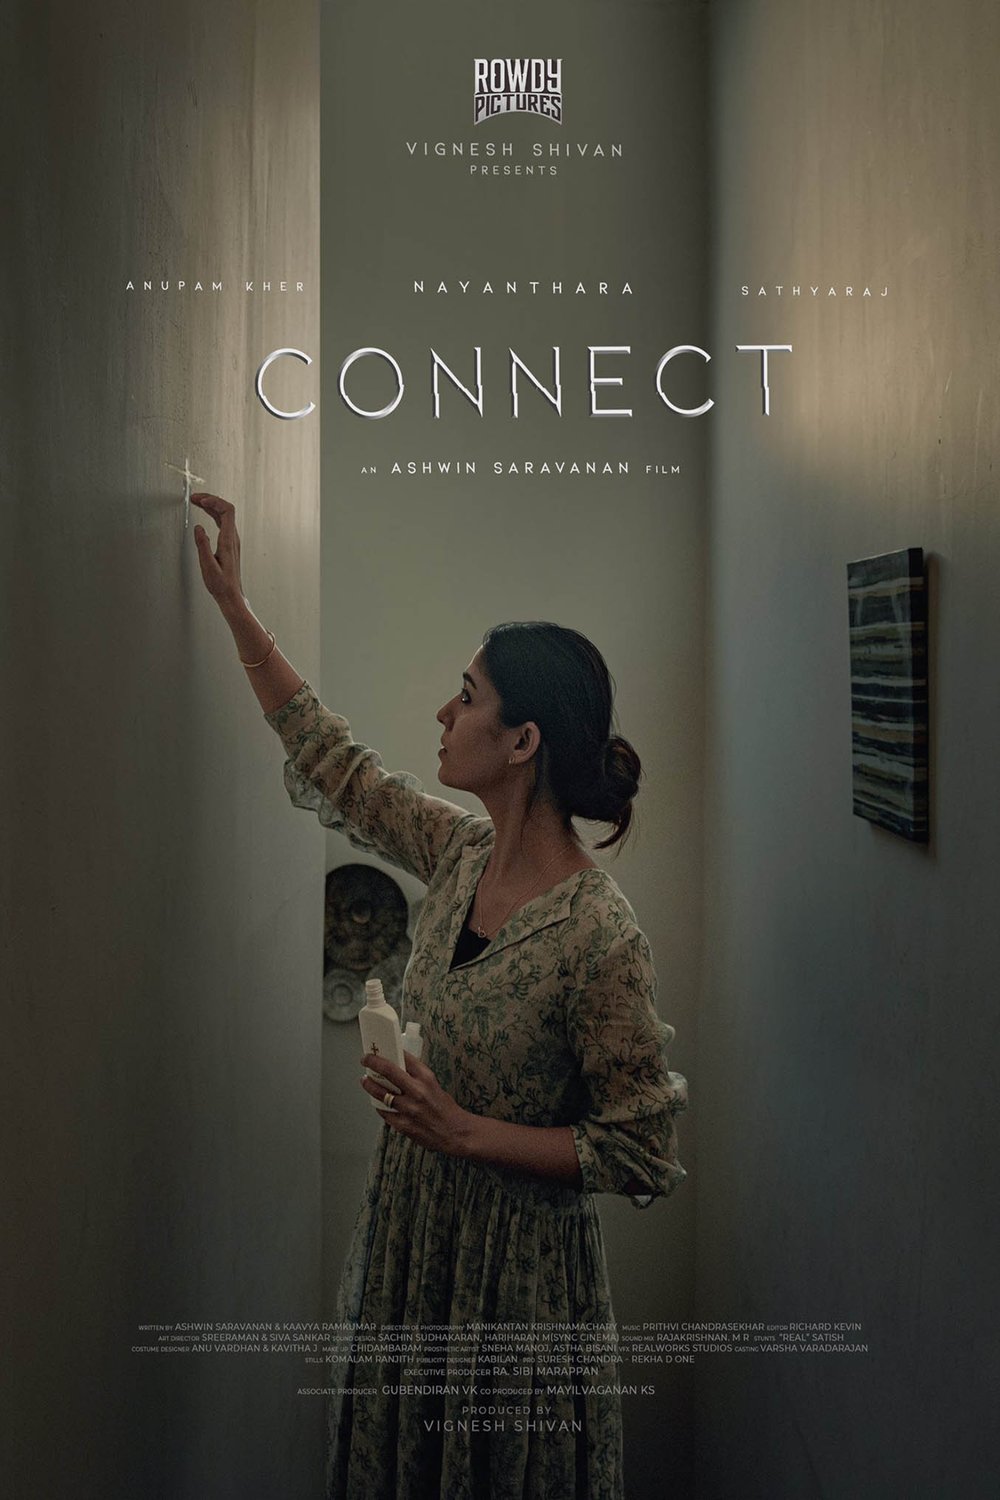 Tamil poster of the movie Connect